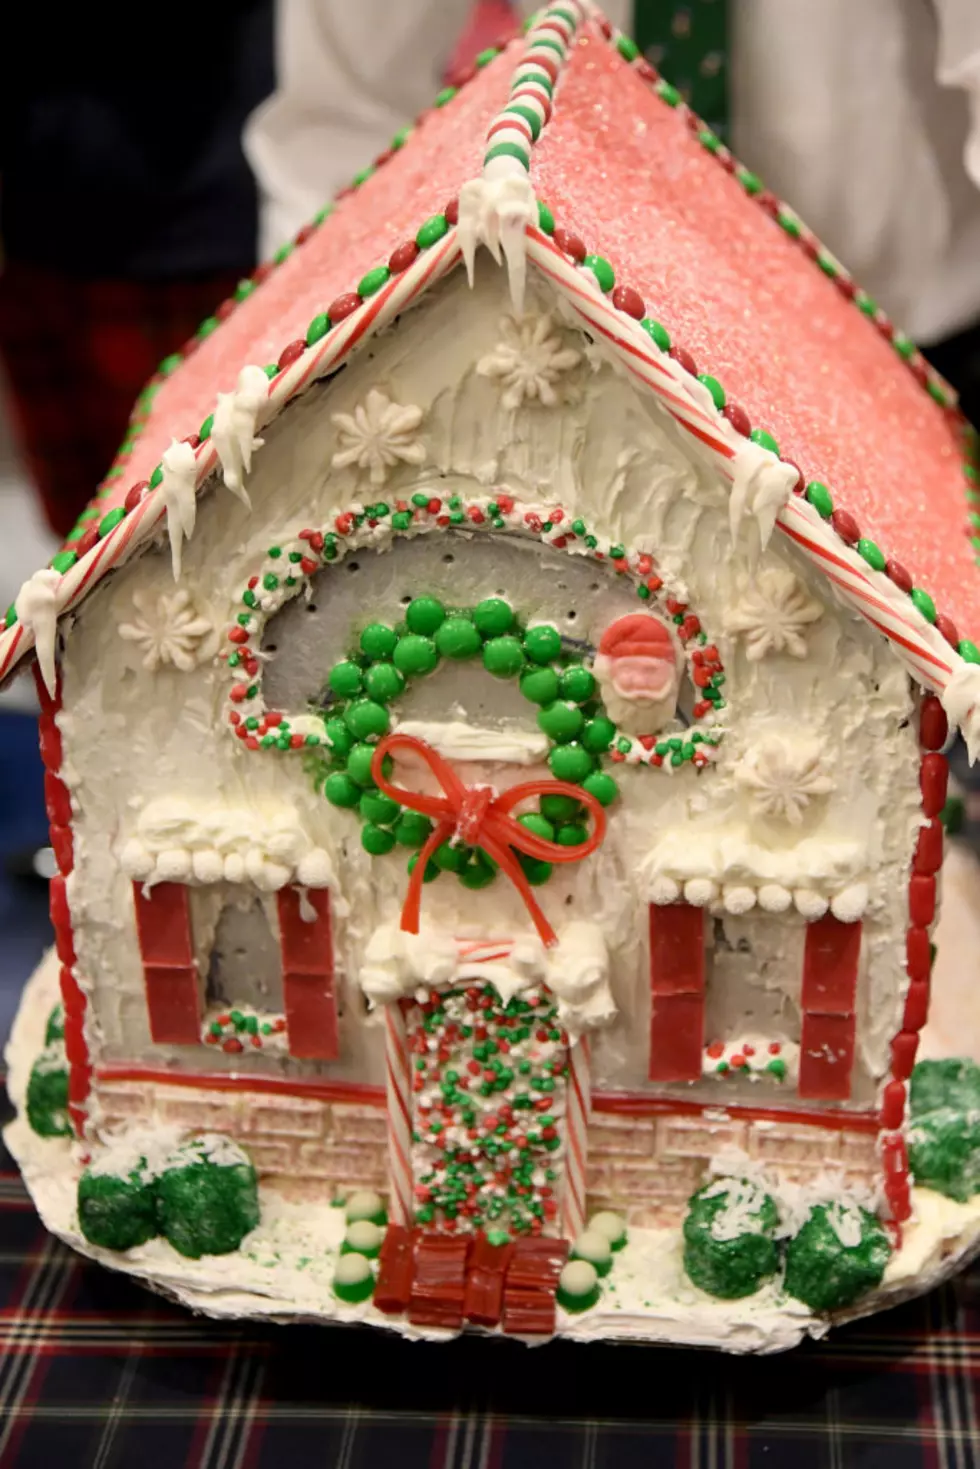 Finally a Gingerbread House That I Will Build and Eat [PIC]